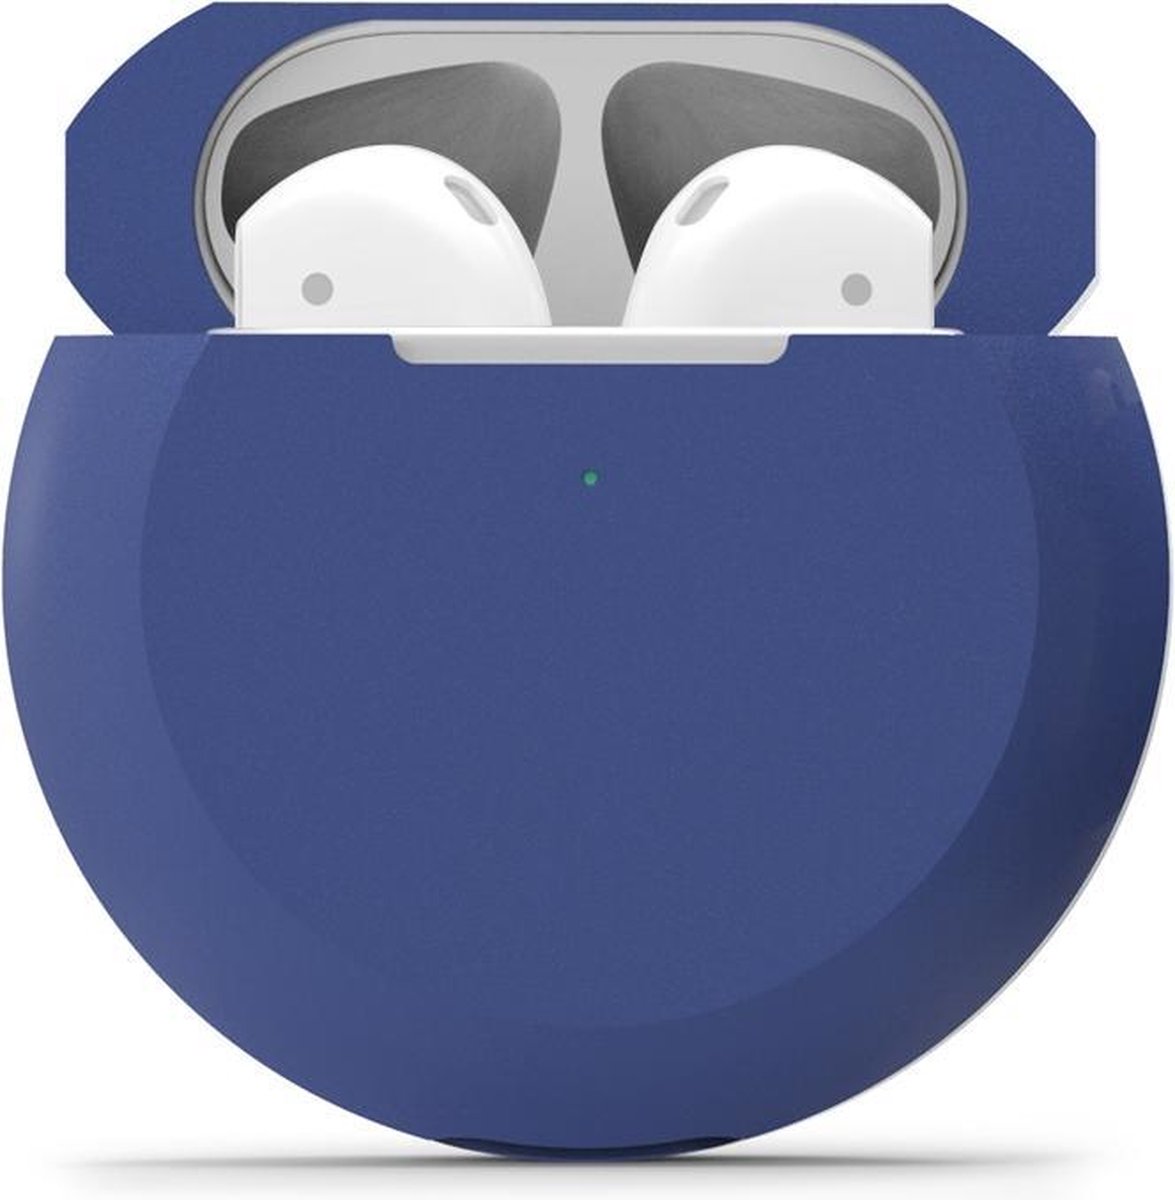 AirPods hoesje van By Qubix - AirPods 1/2 hoesje siliconen shockprotect series - blauw